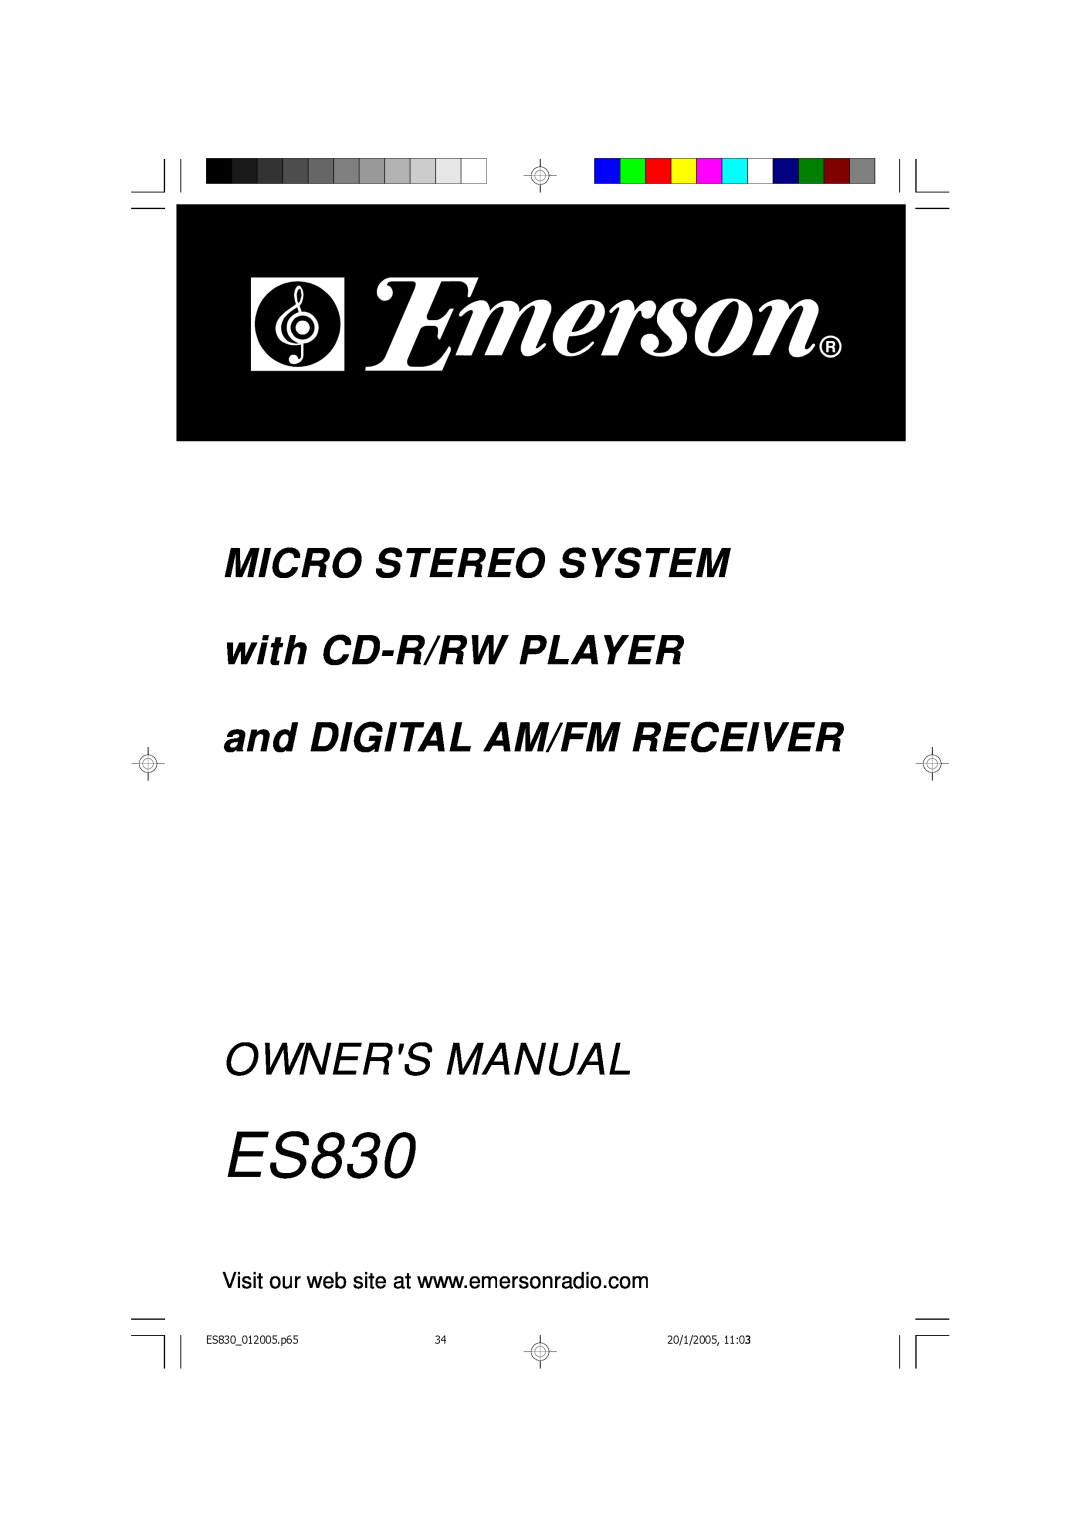 Emerson owner manual MICRO STEREO SYSTEM with CD-R/RWPLAYER, and DIGITAL AM/FM RECEIVER, ES830 012005.p65 